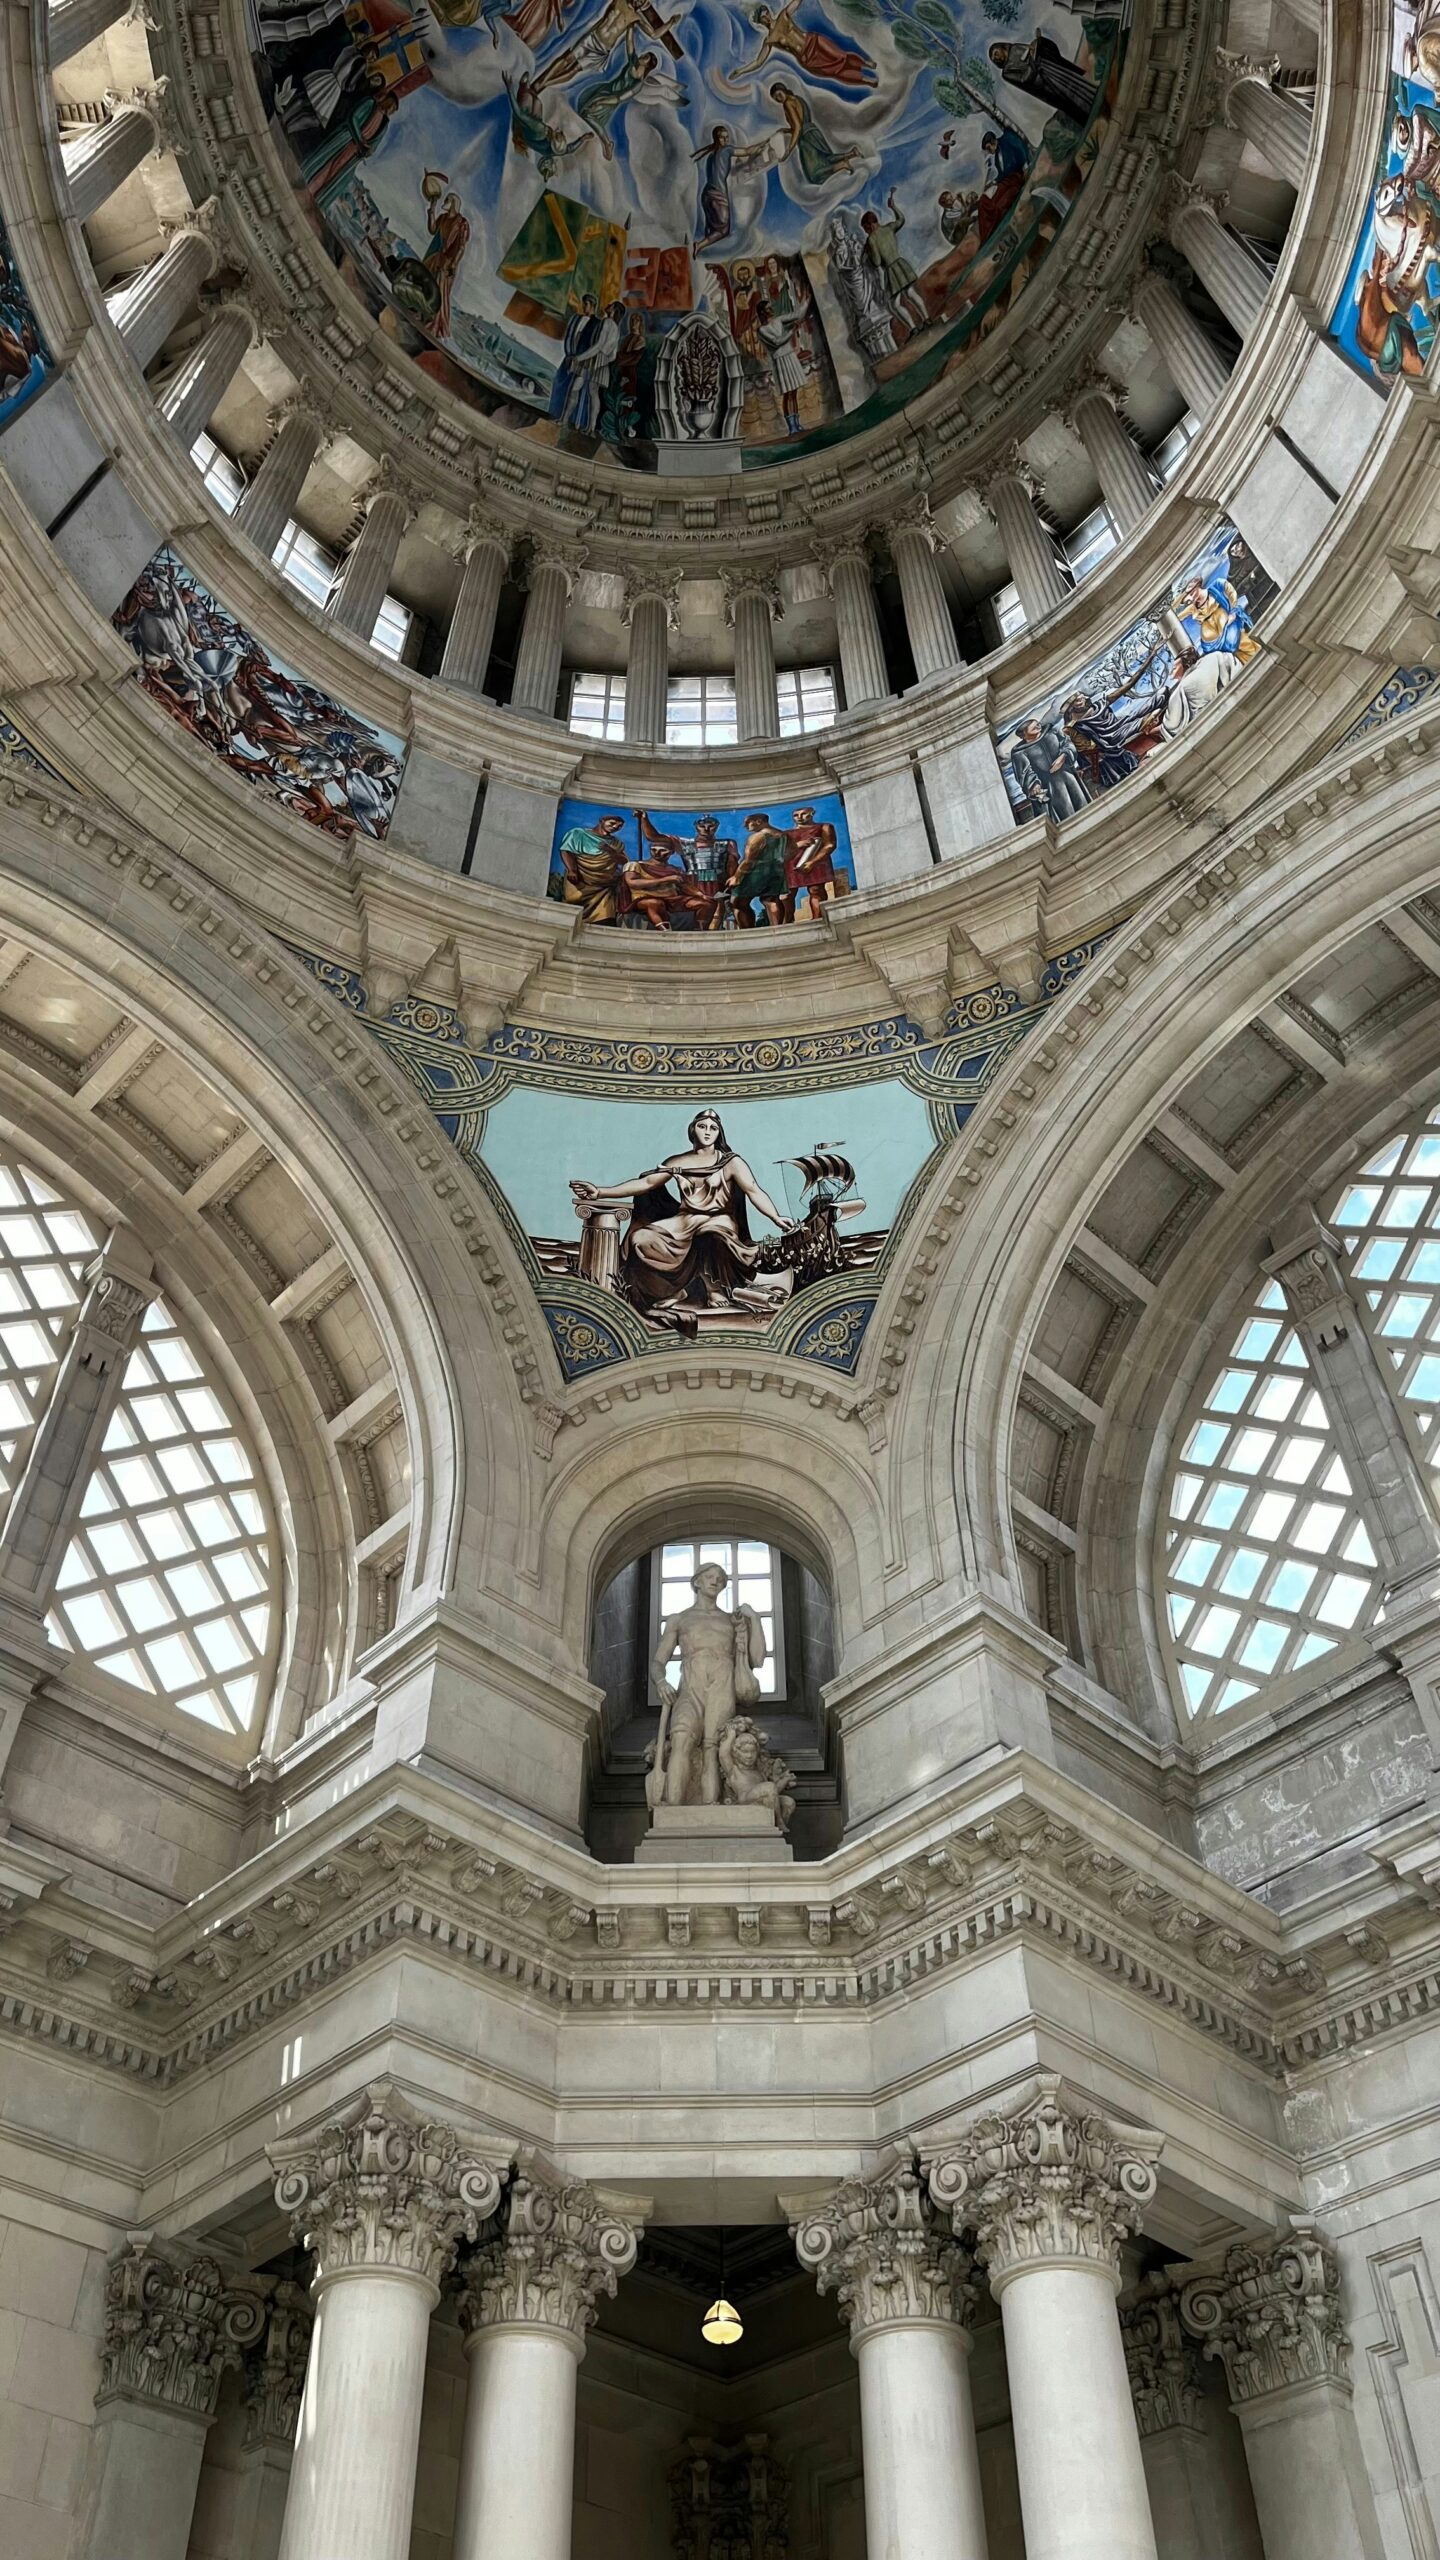 the ceiling of a large building with many paintings on it